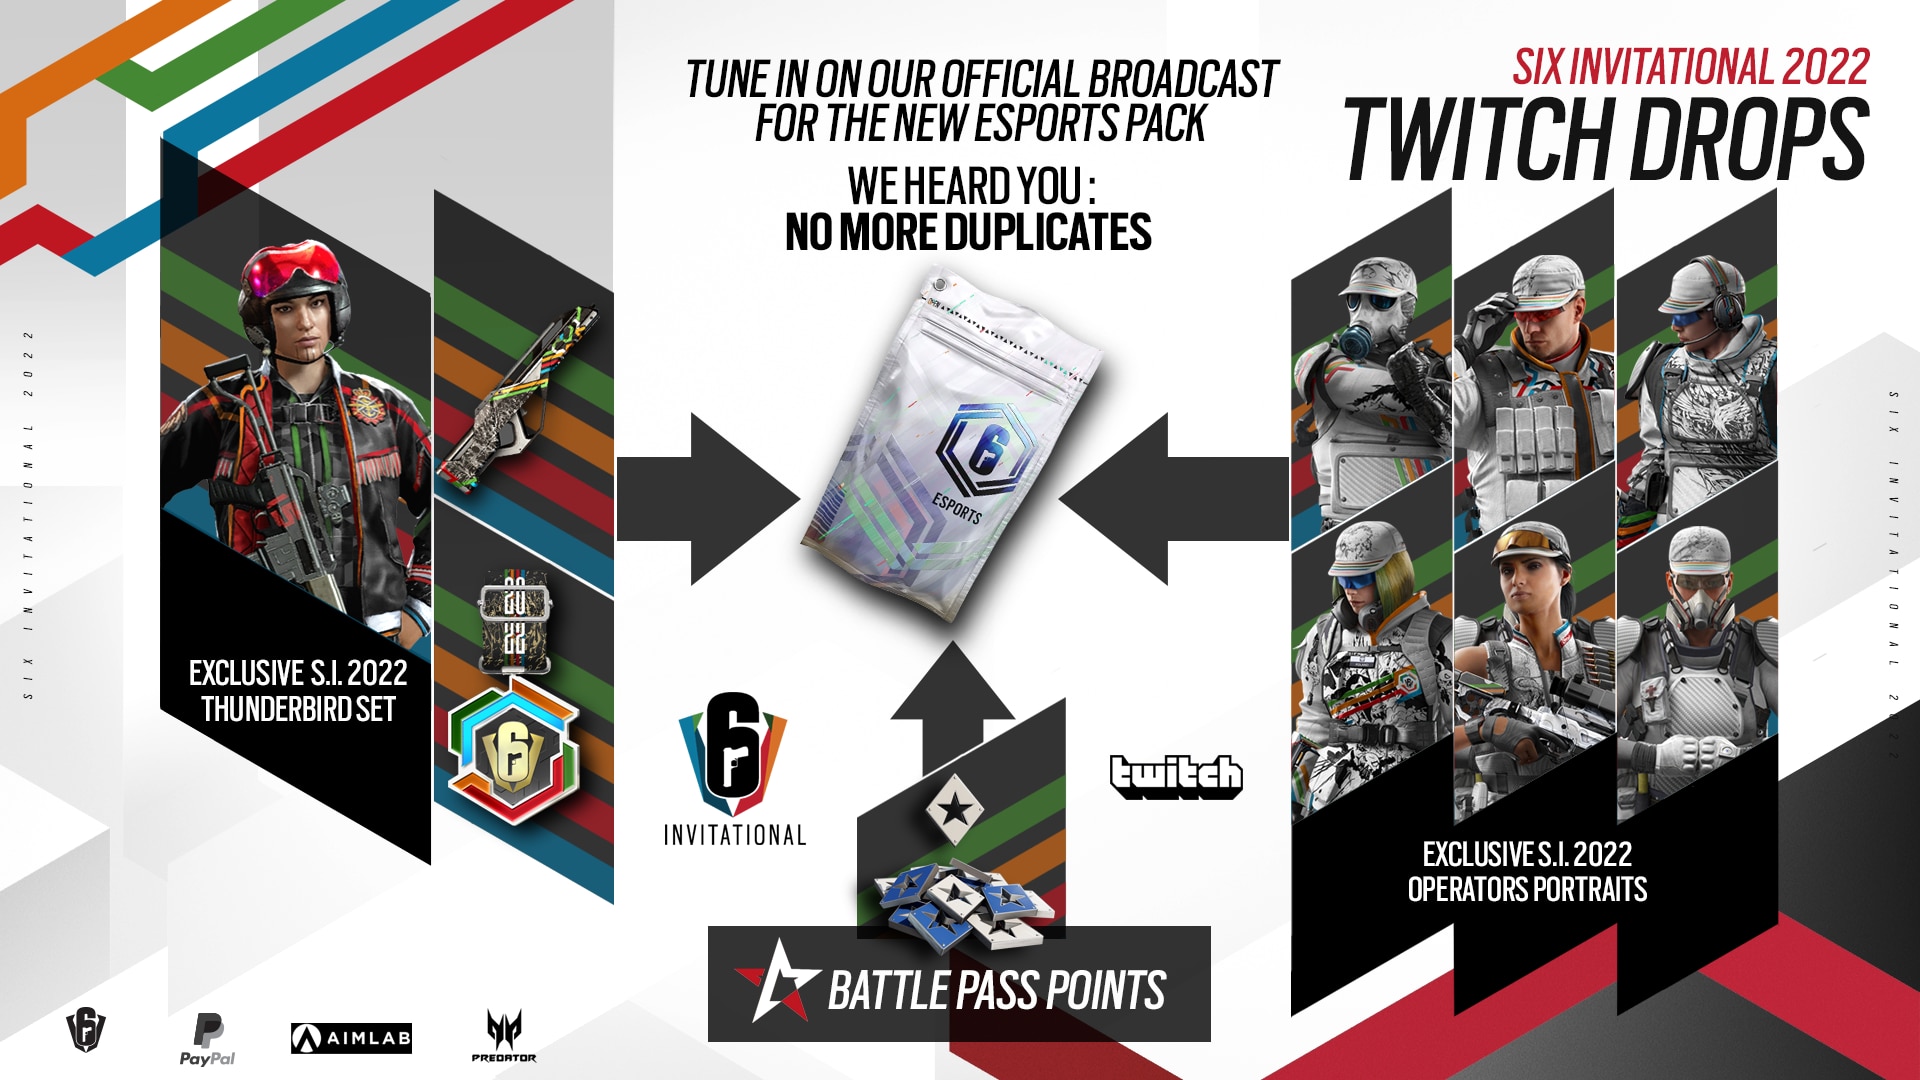 [R6SE] - Introducing the Twitch Drops Program for the Six Invitational 2022 - Esports Pack Twitch